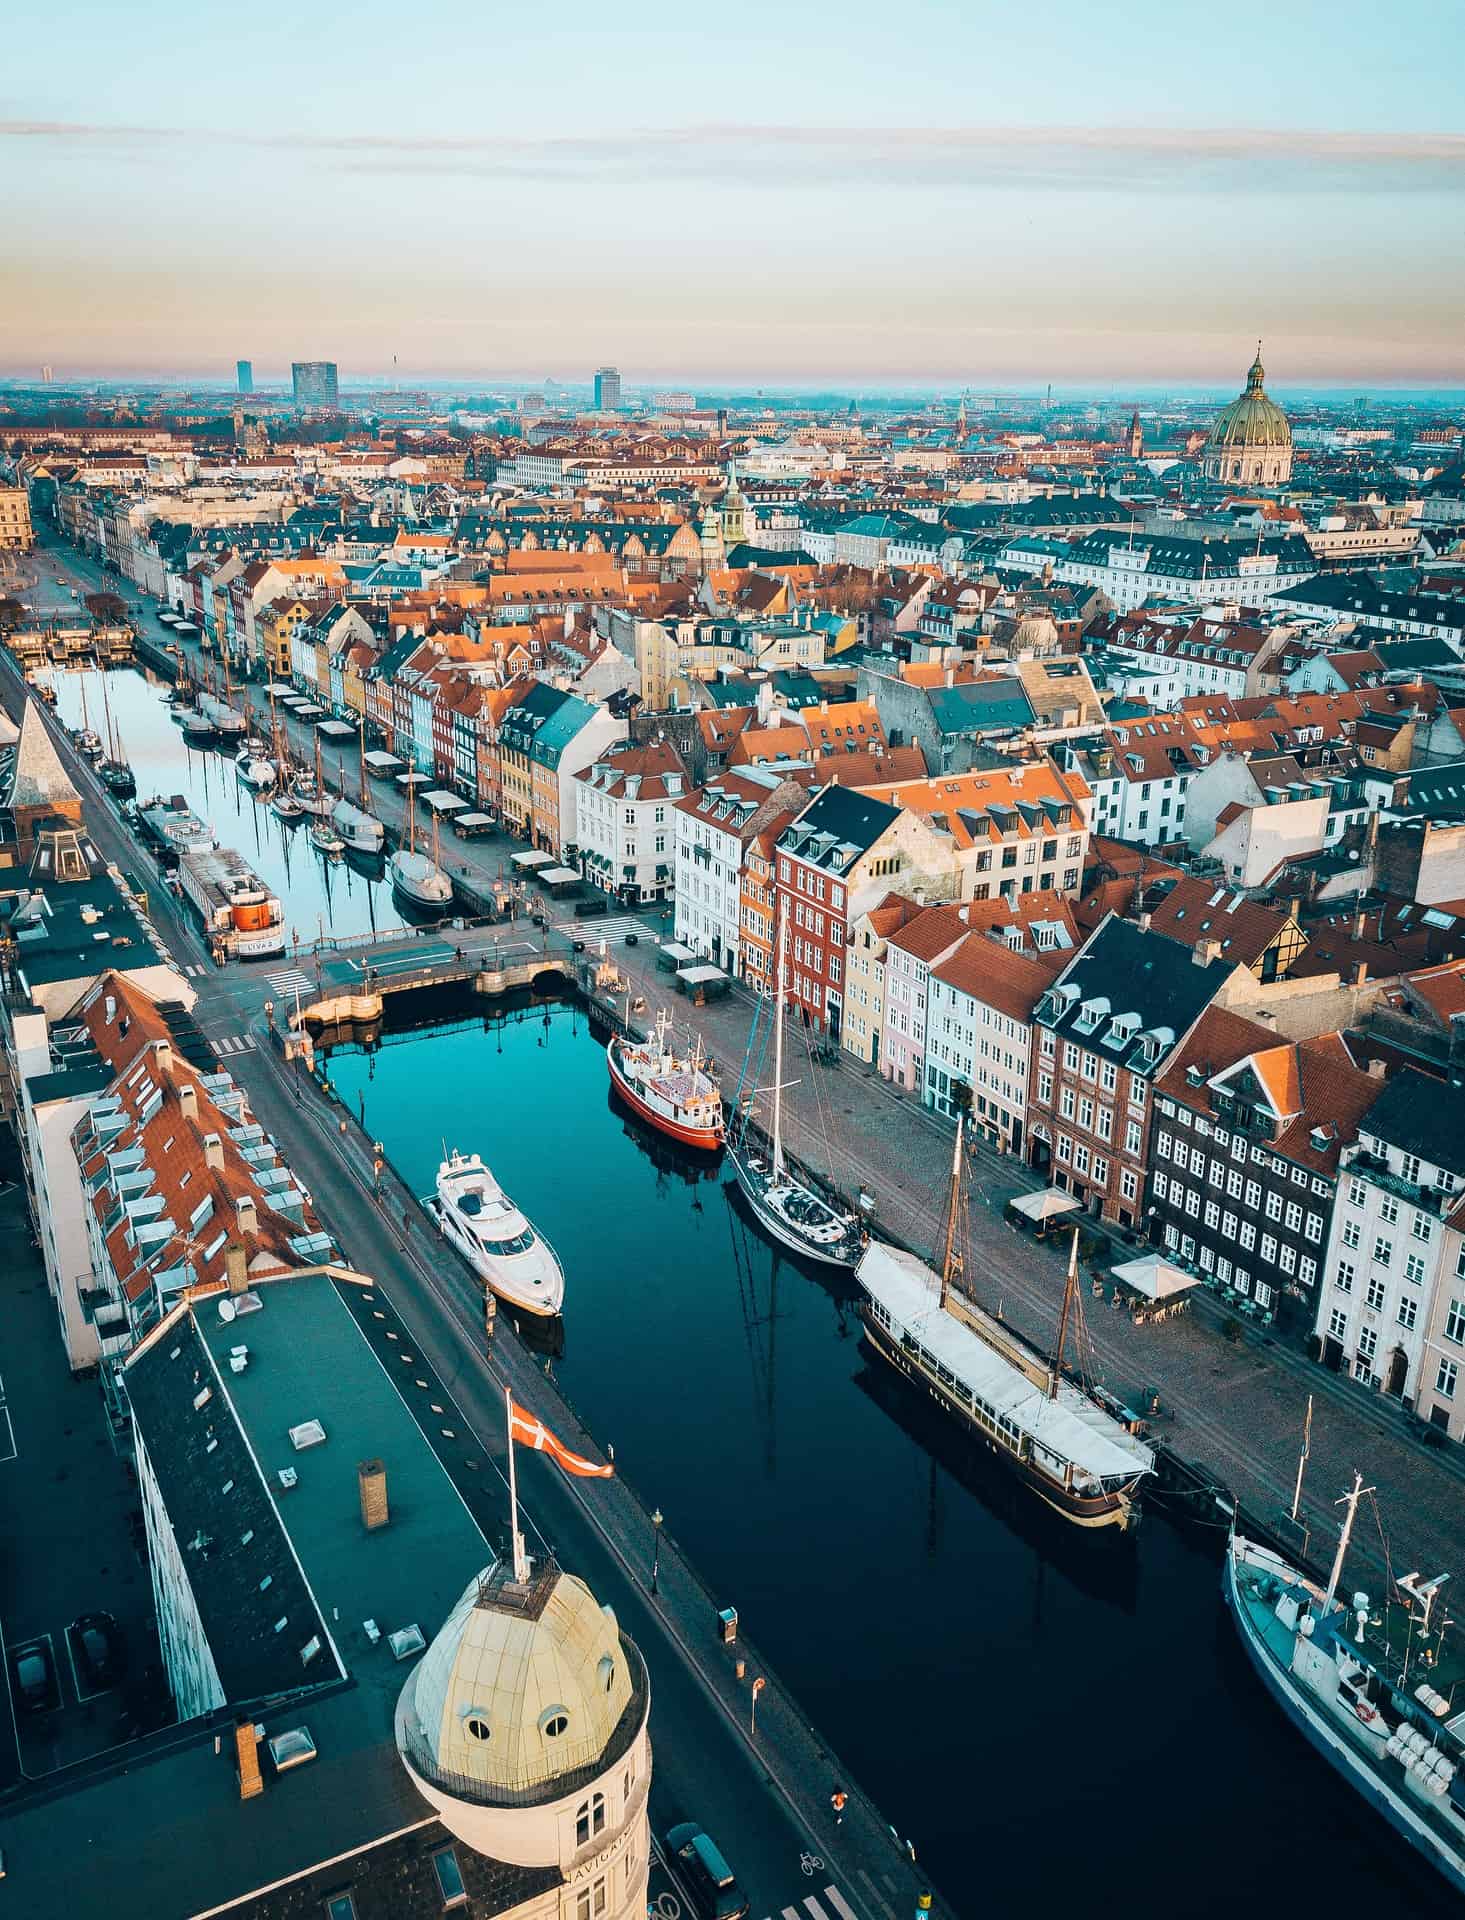 Getting to Live in Denmark